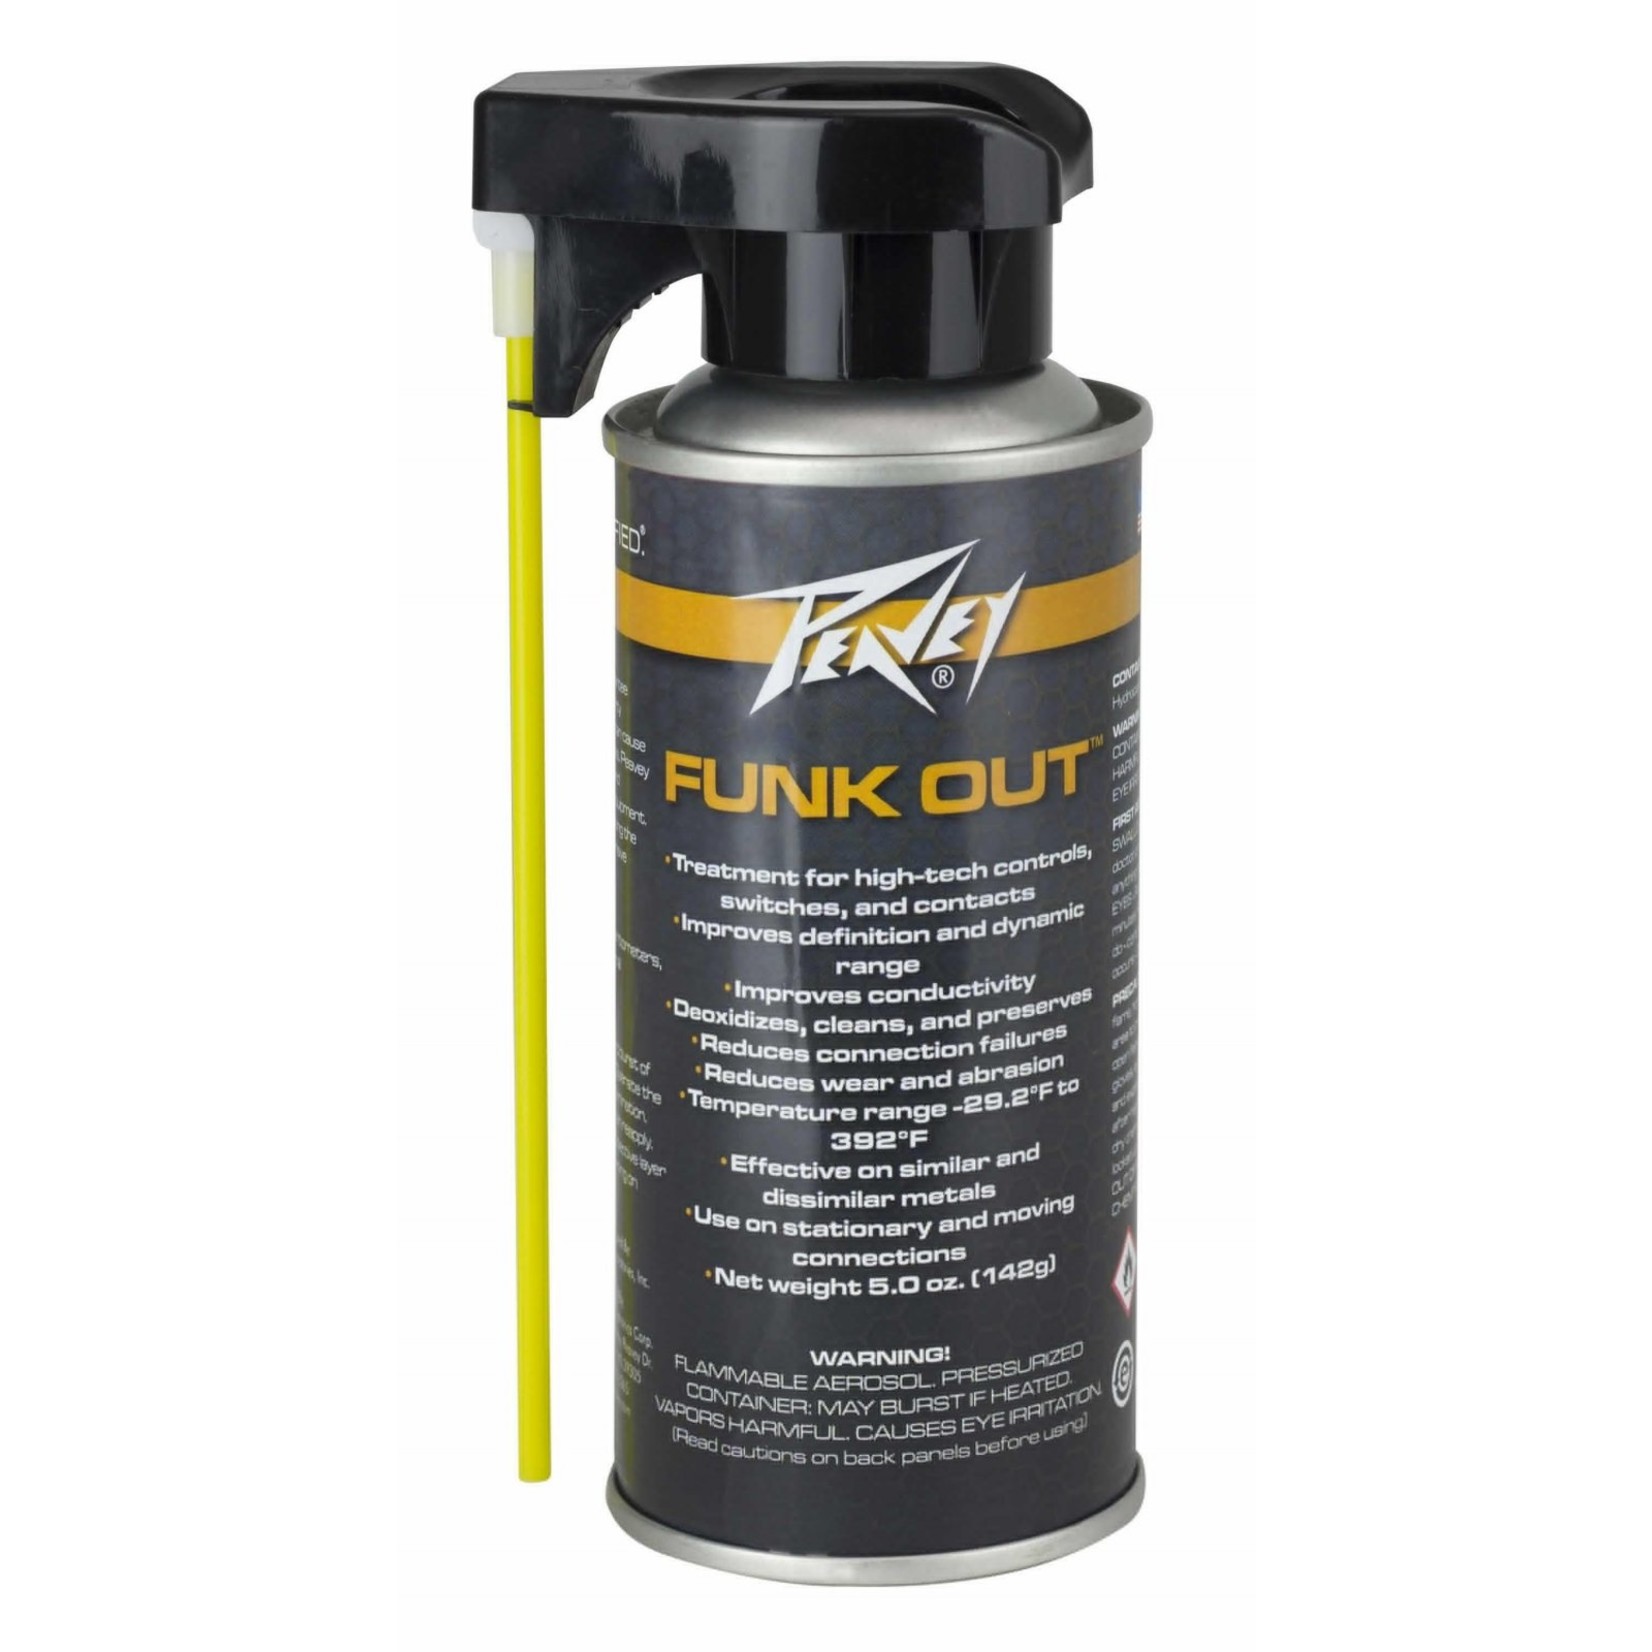 Peavey "Funk Out" Contact and Switch Cleaner